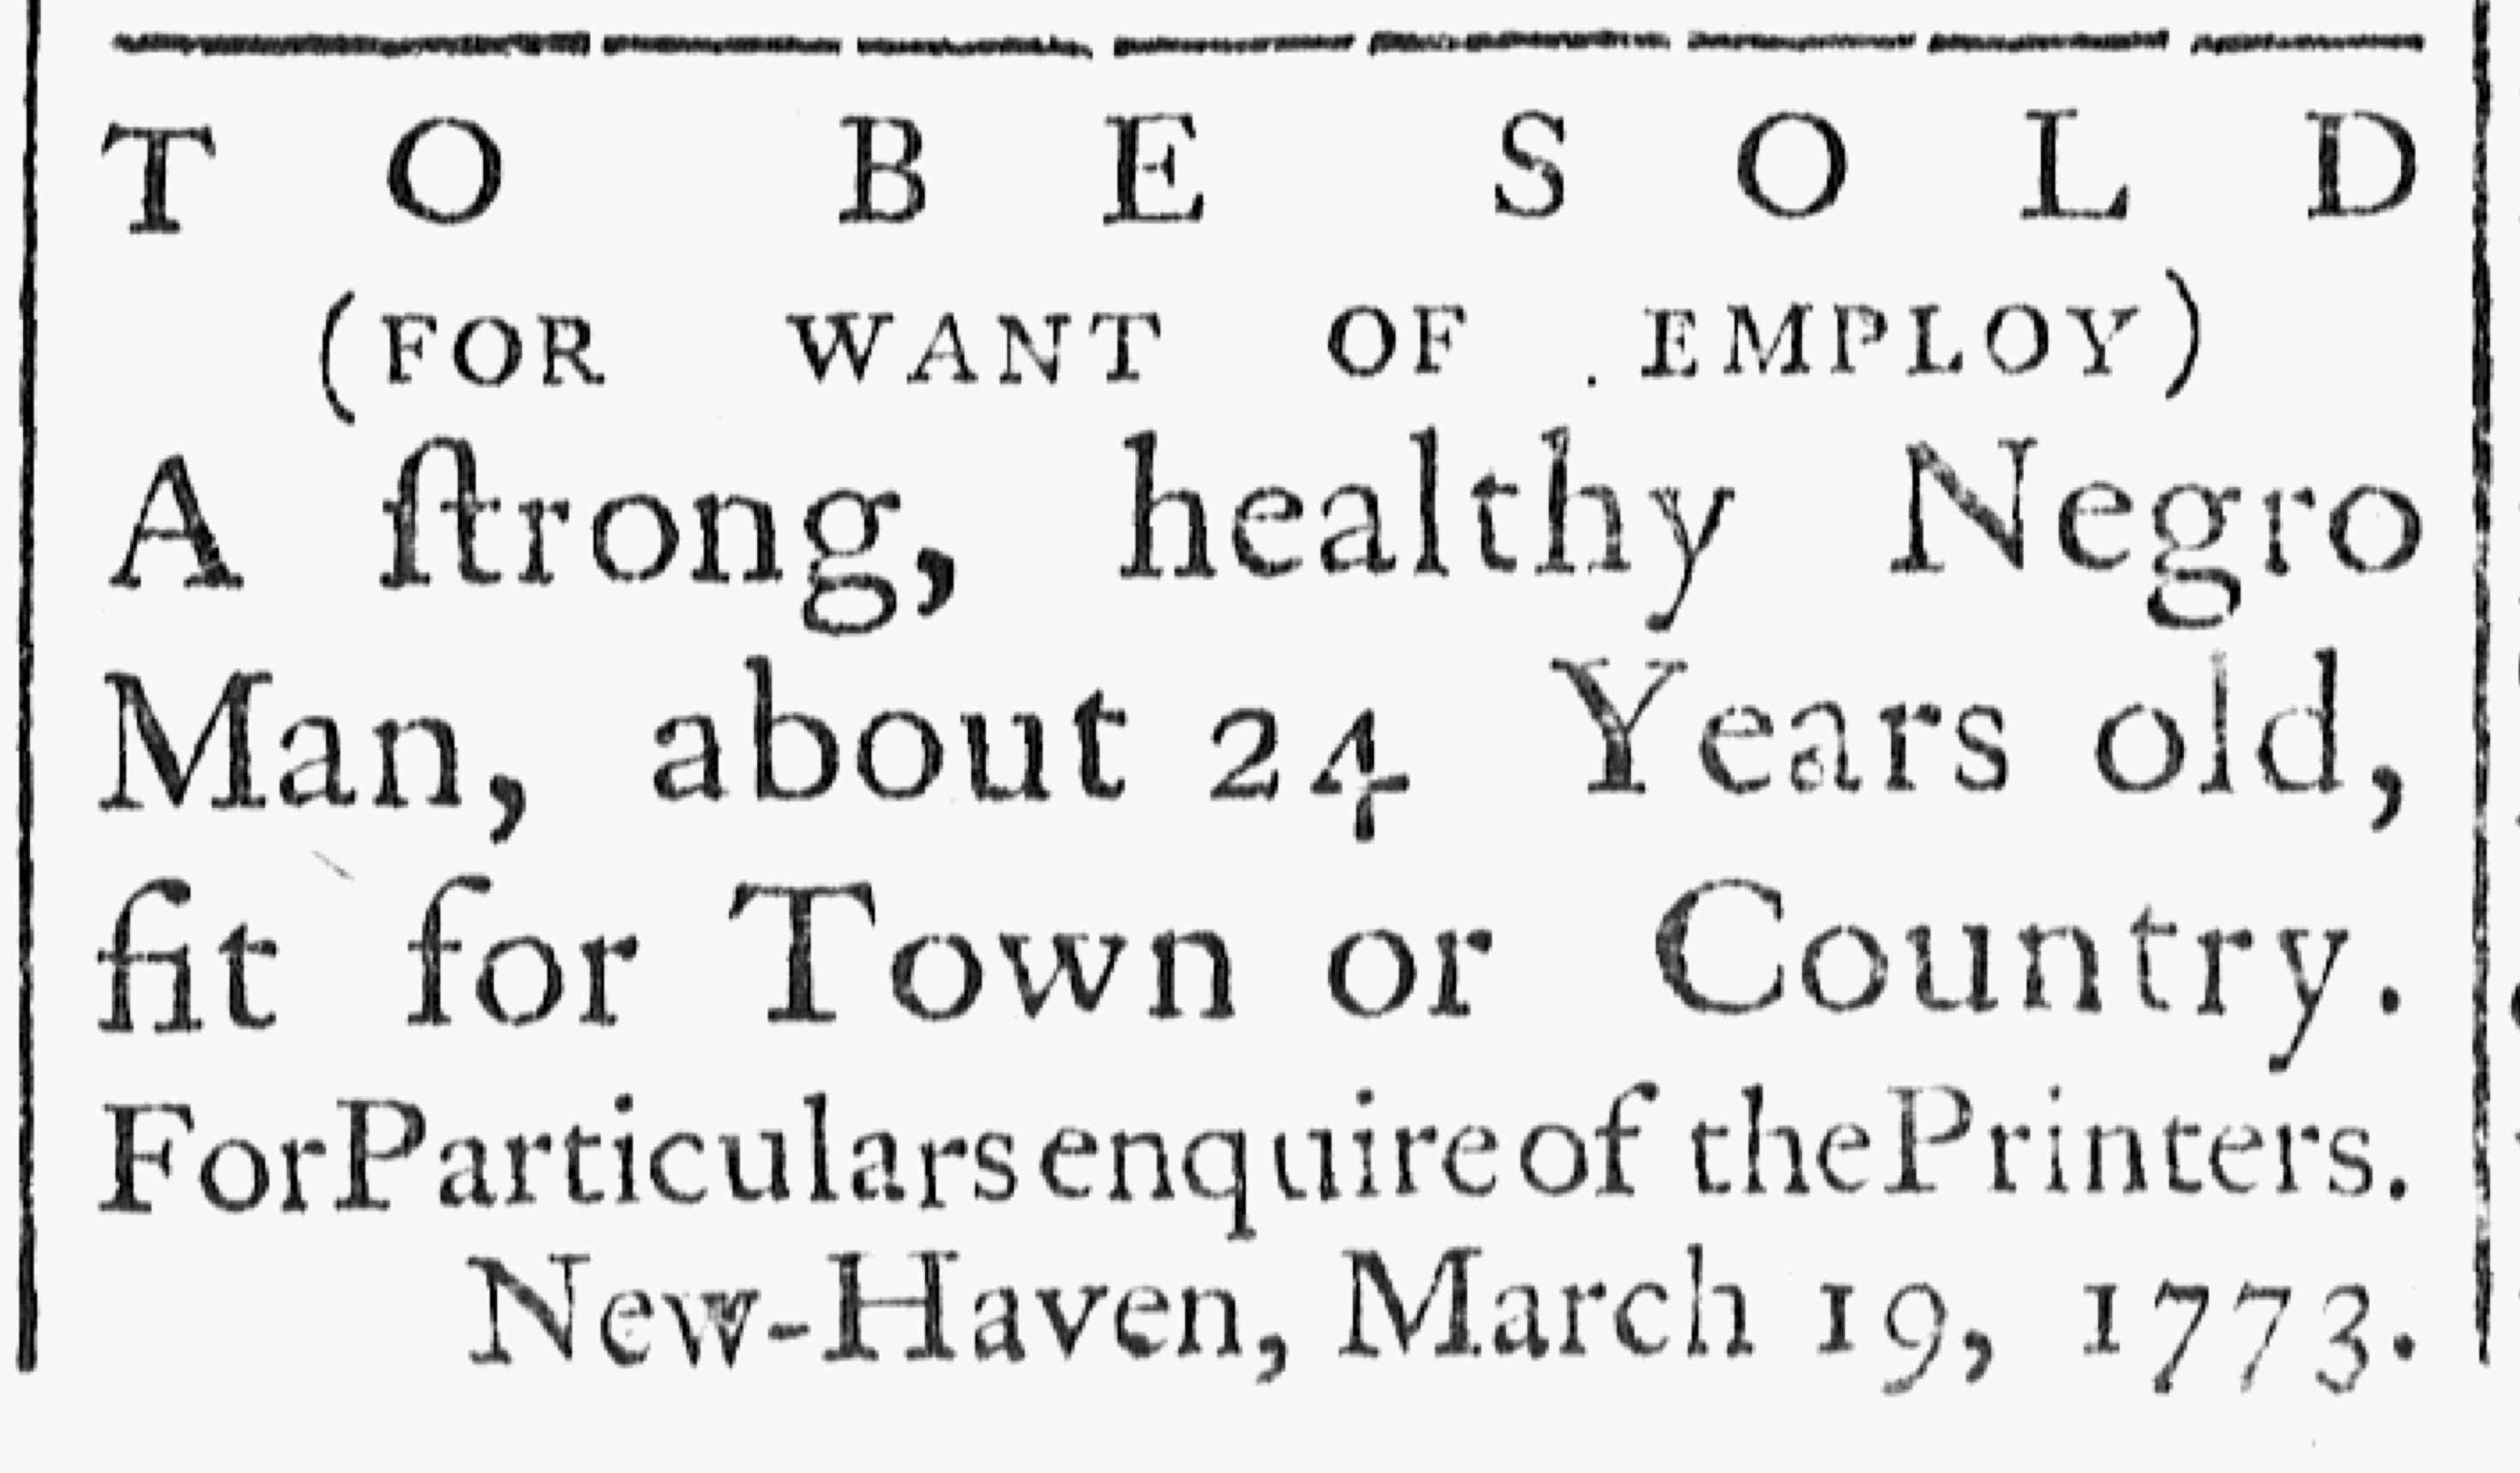 Slavery Advertisements Published March 19 1773 The Adverts 250 Project